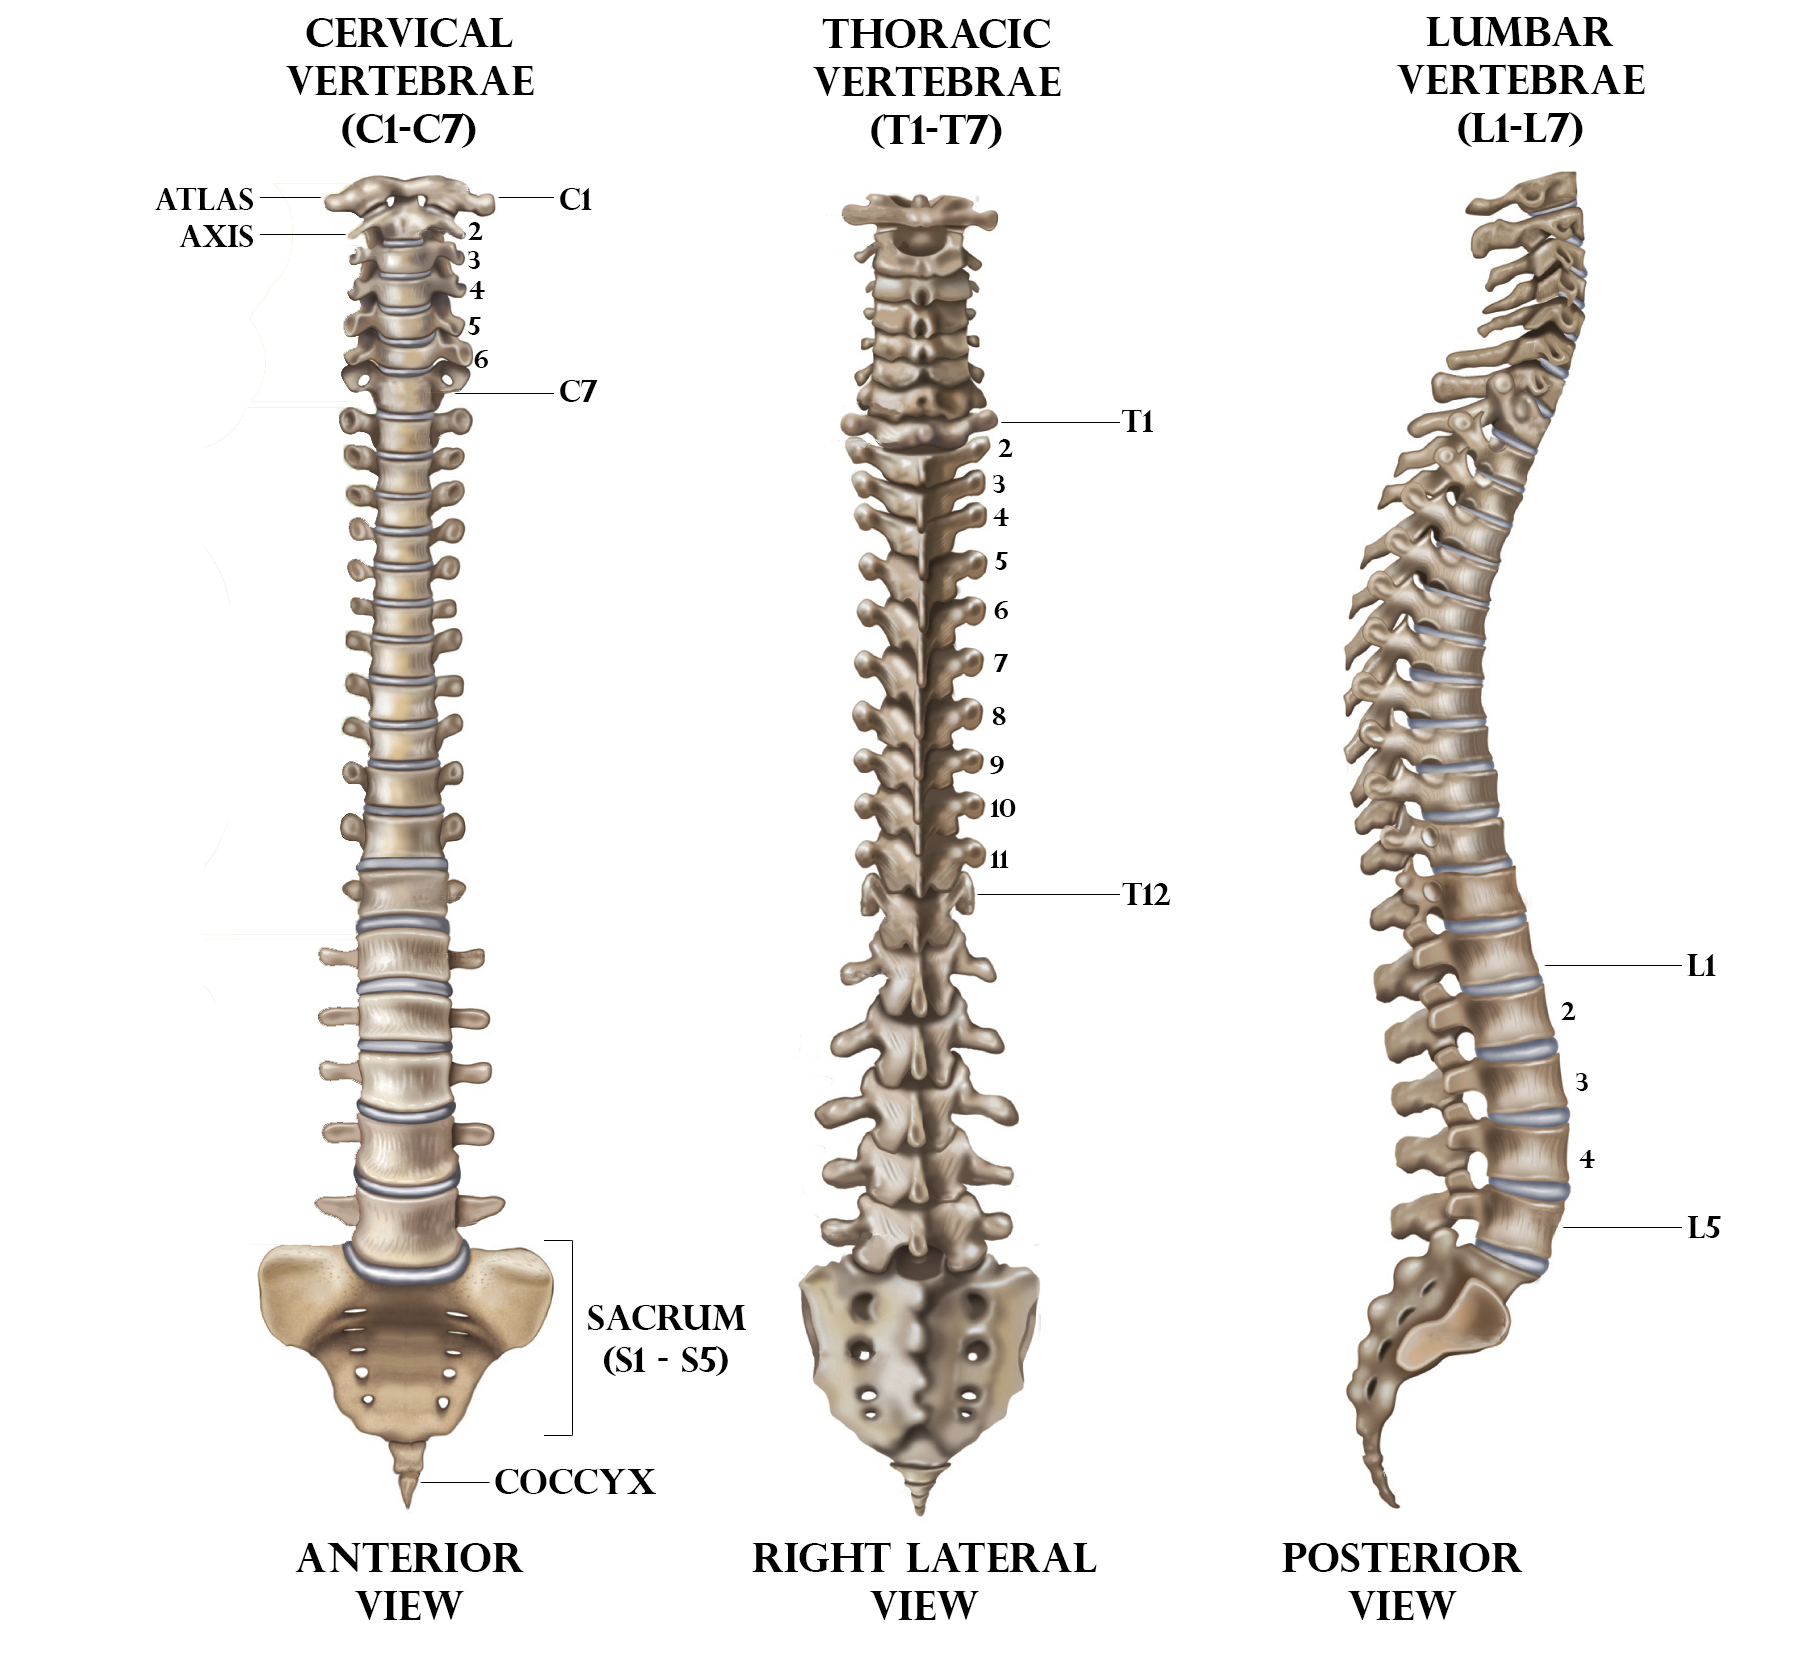 the-number-of-intervertebral-discs-in-the-human-spine-is-a-25-b-23-c